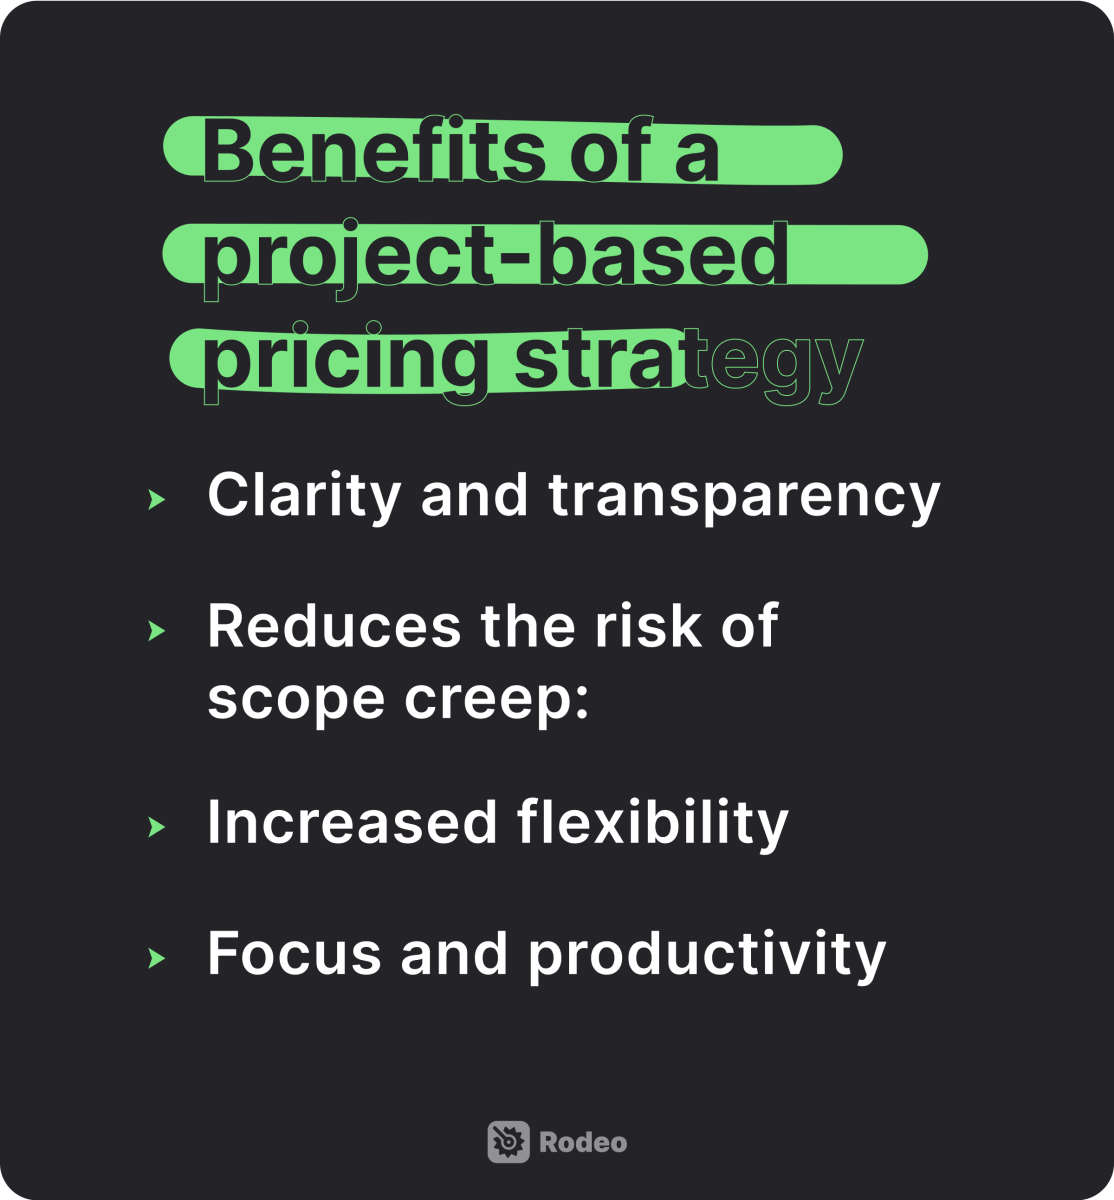 Benefits of a project-based pricing strategy